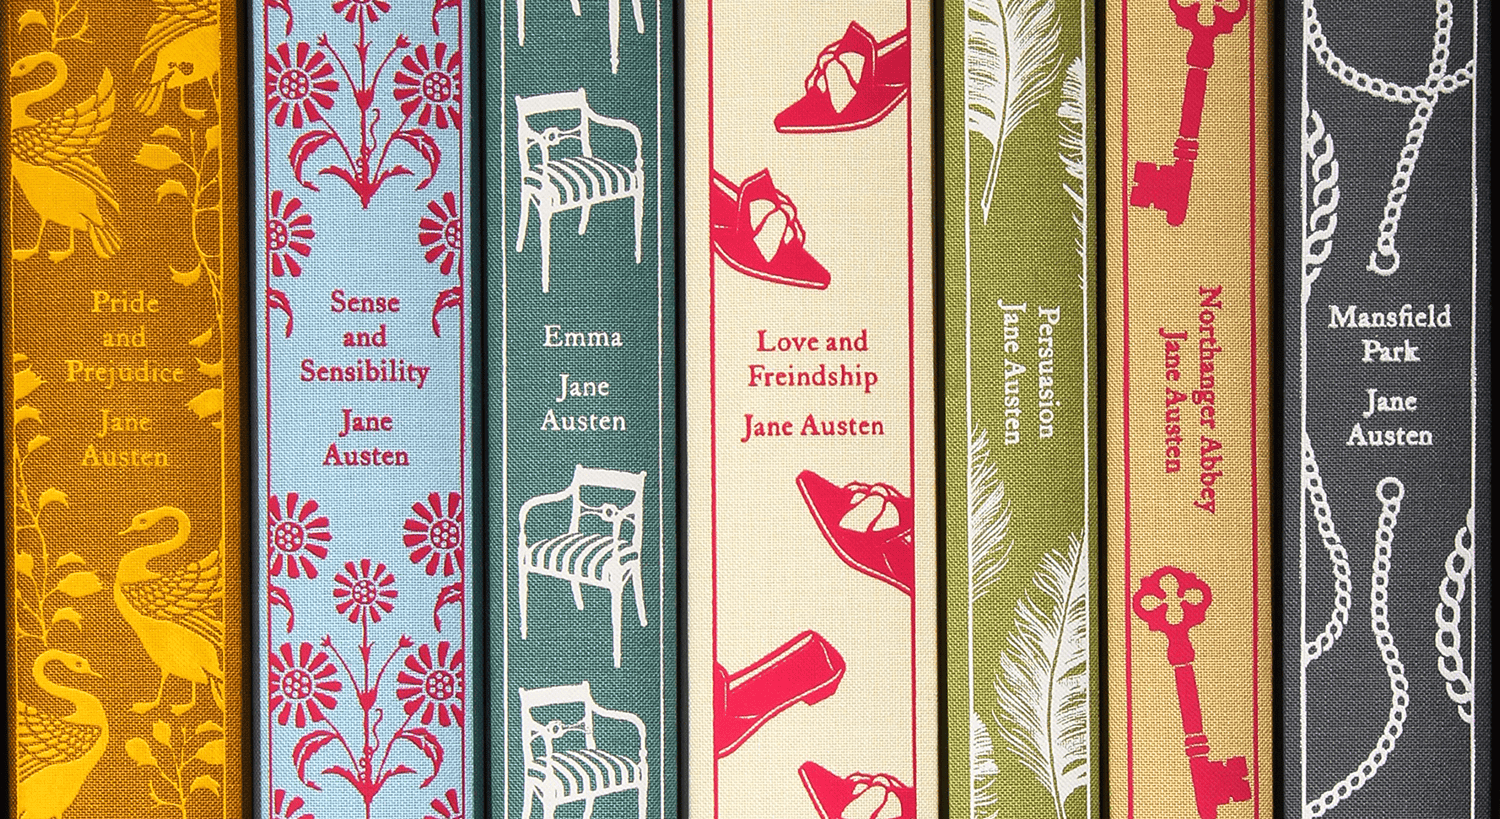 All about Jane Austen's books